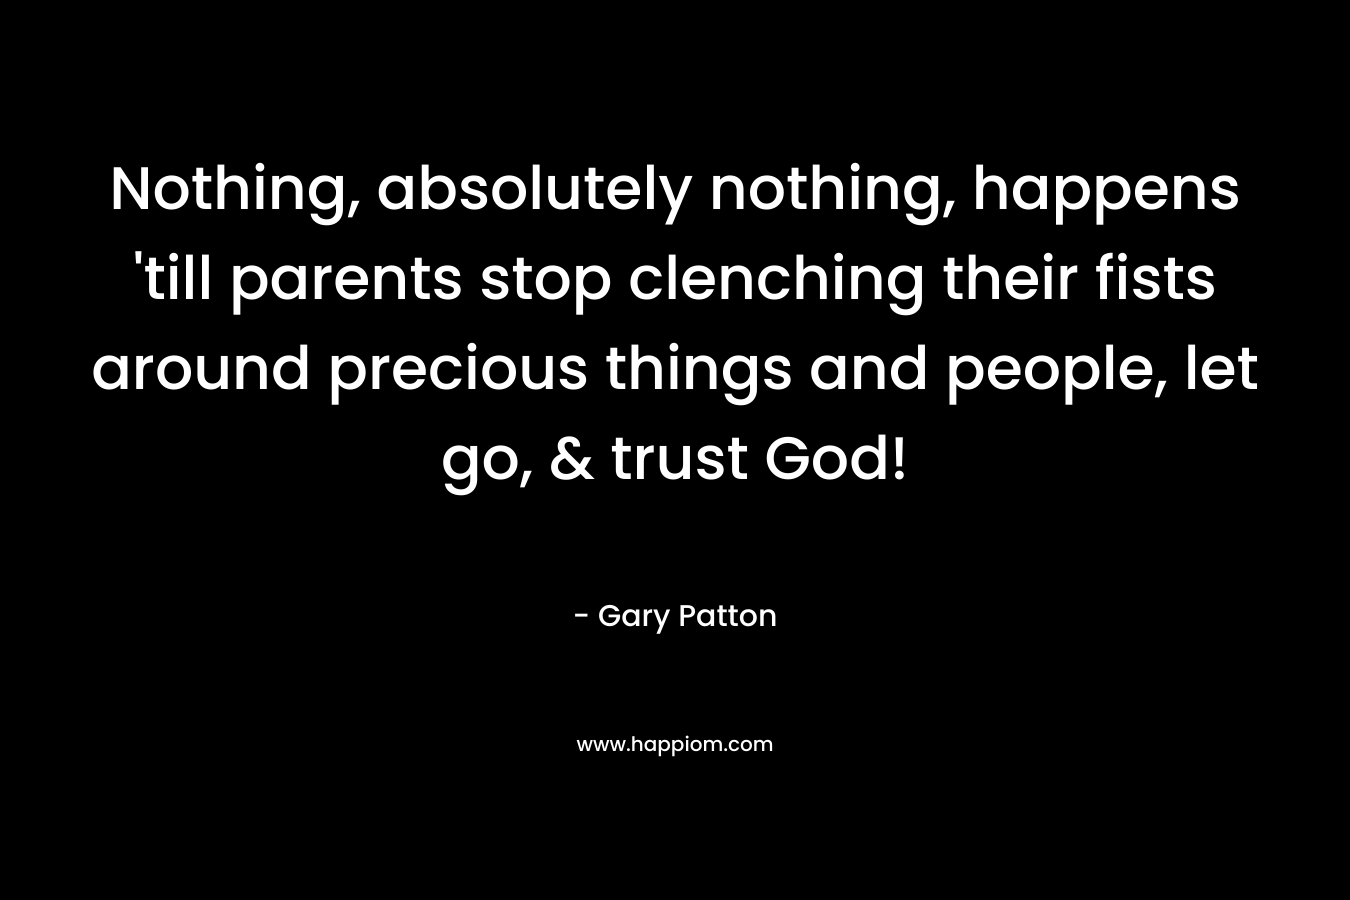 Nothing, absolutely nothing, happens ’till parents stop clenching their fists around precious things and people, let go, & trust God! – Gary Patton